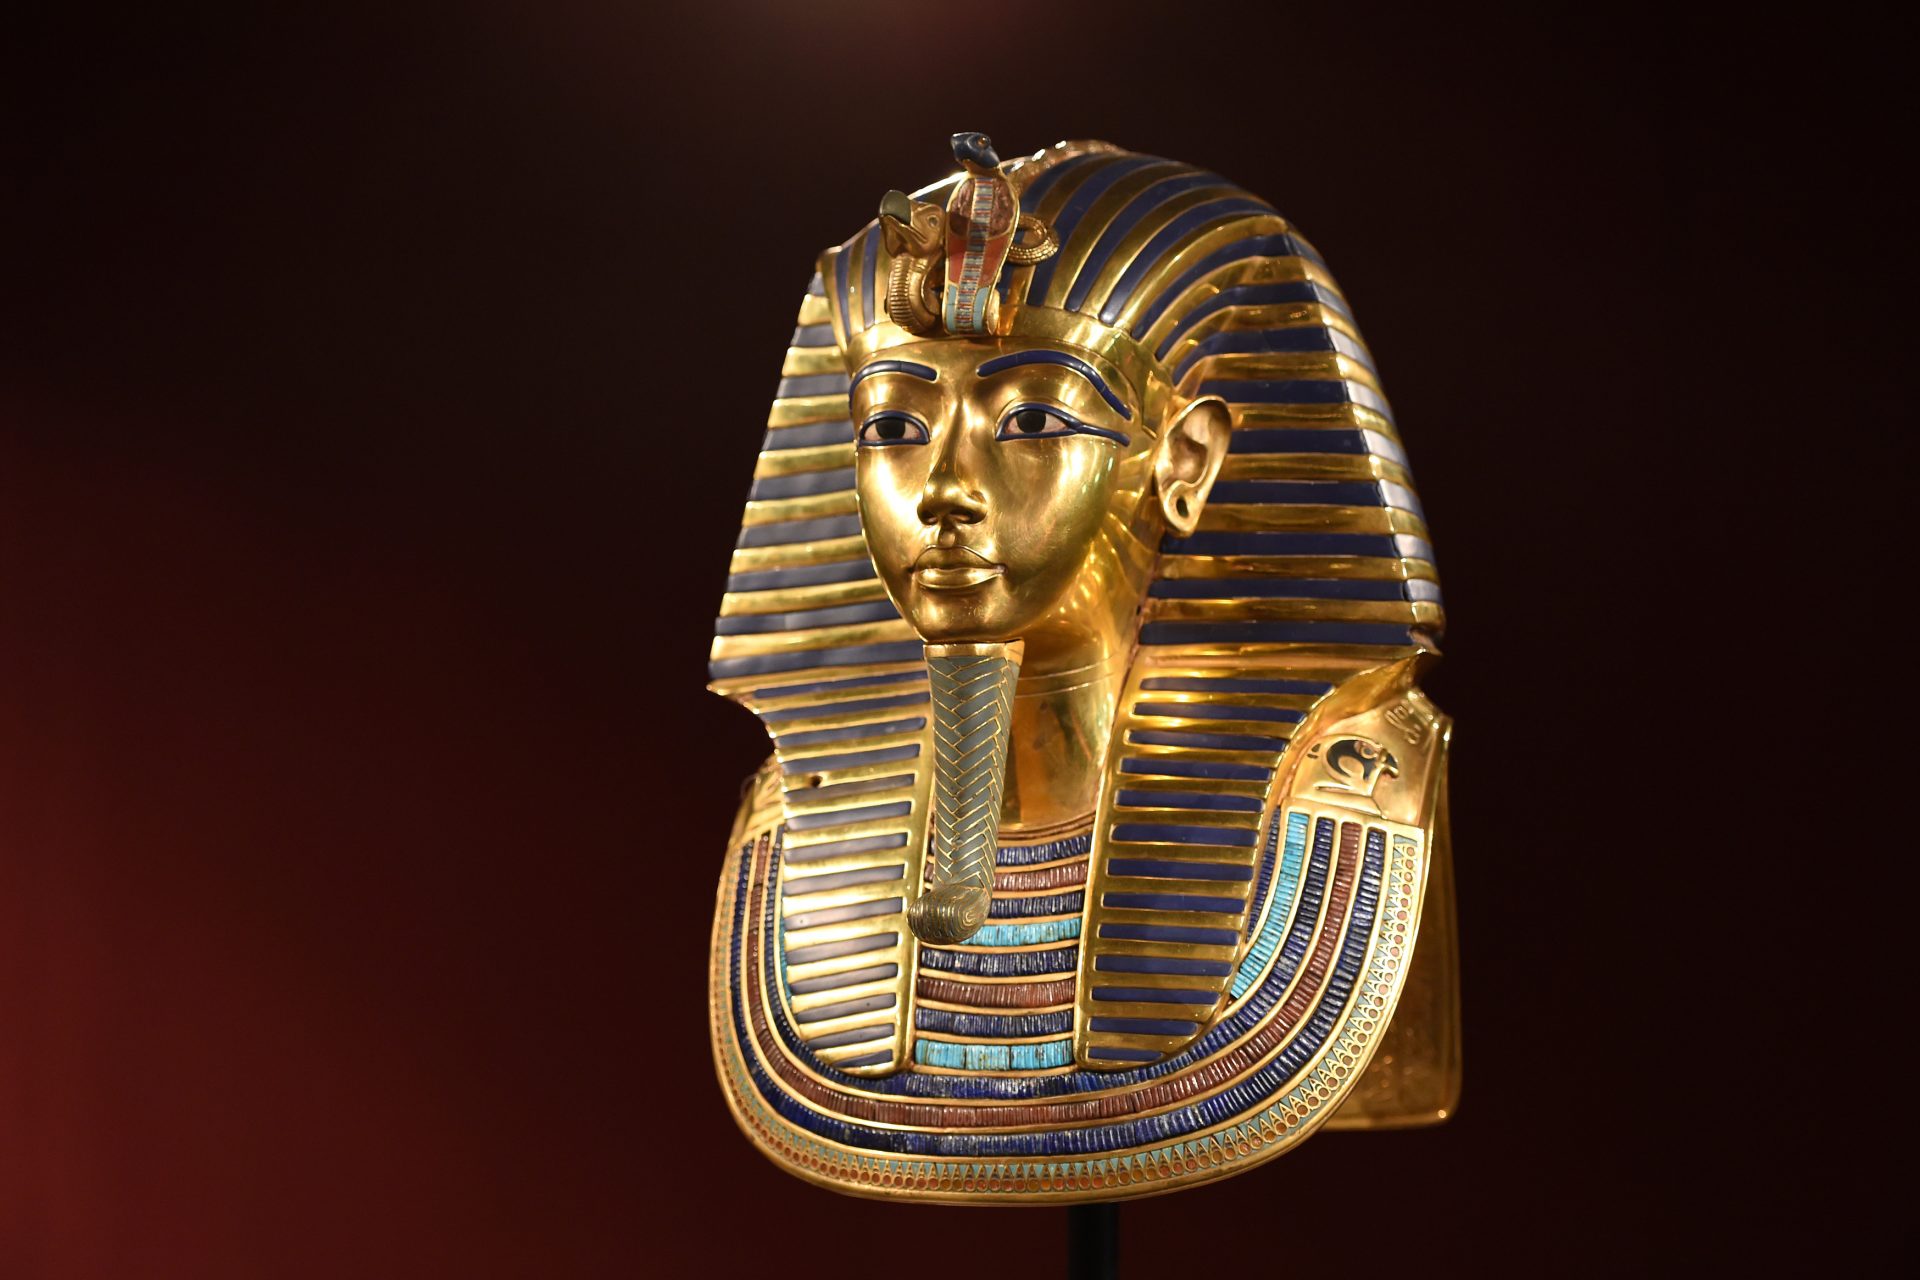 Where does the story of King Tut begin?